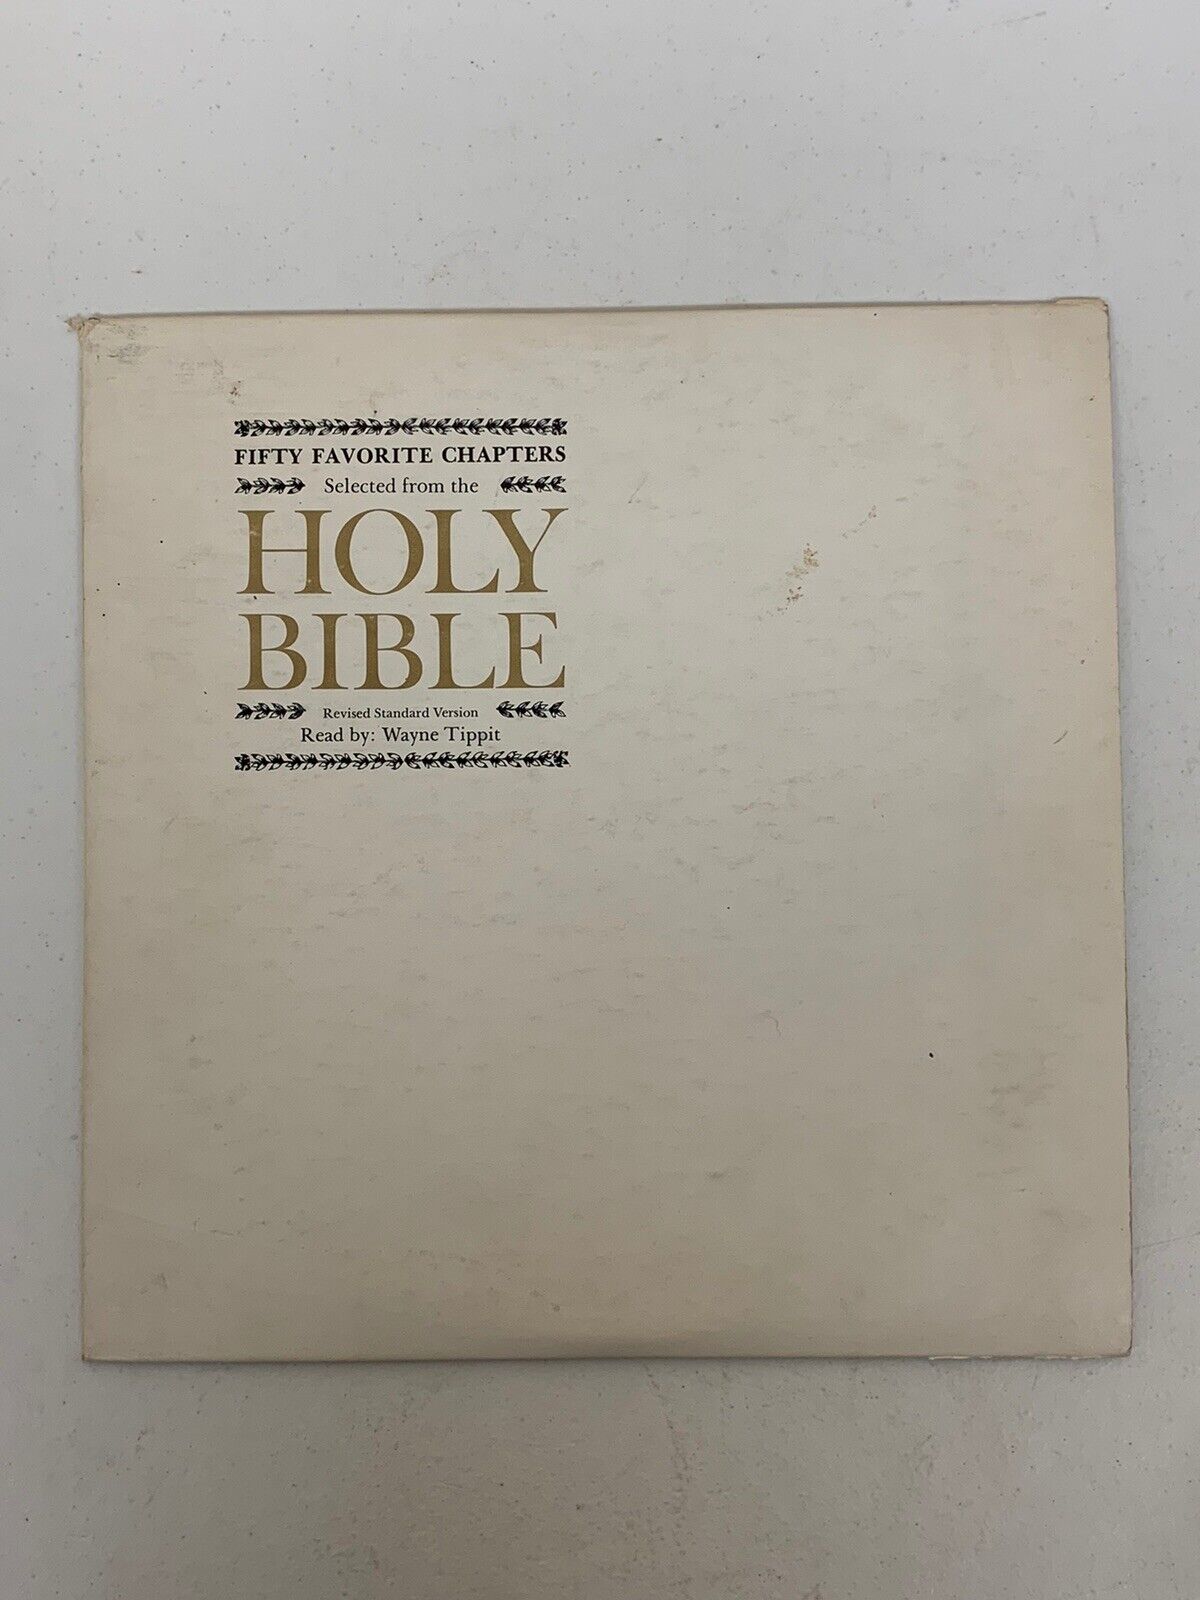 50 Favorite Chapters Selected From The Holy Bible Braille 16 2⁄3RPM Record Set